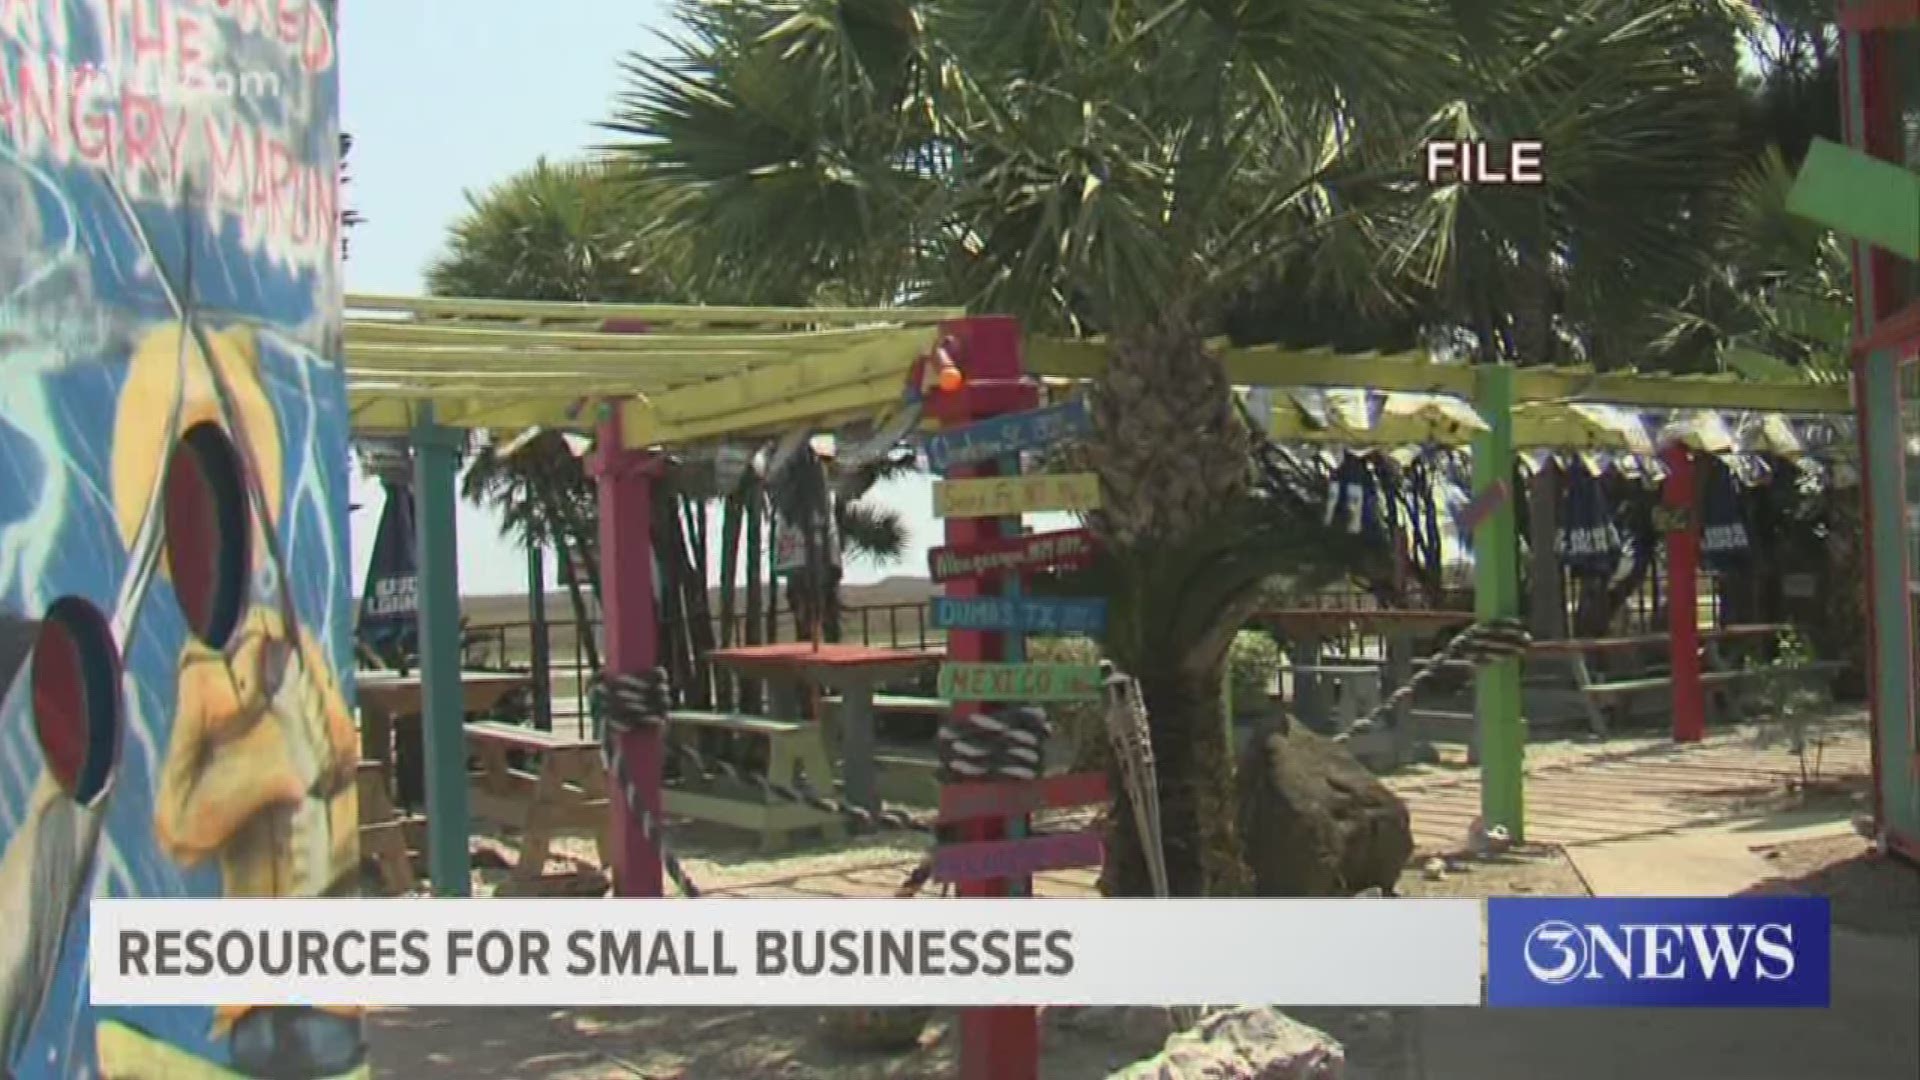 Del Mar College's small business development center has multiple resources available to small business owners.